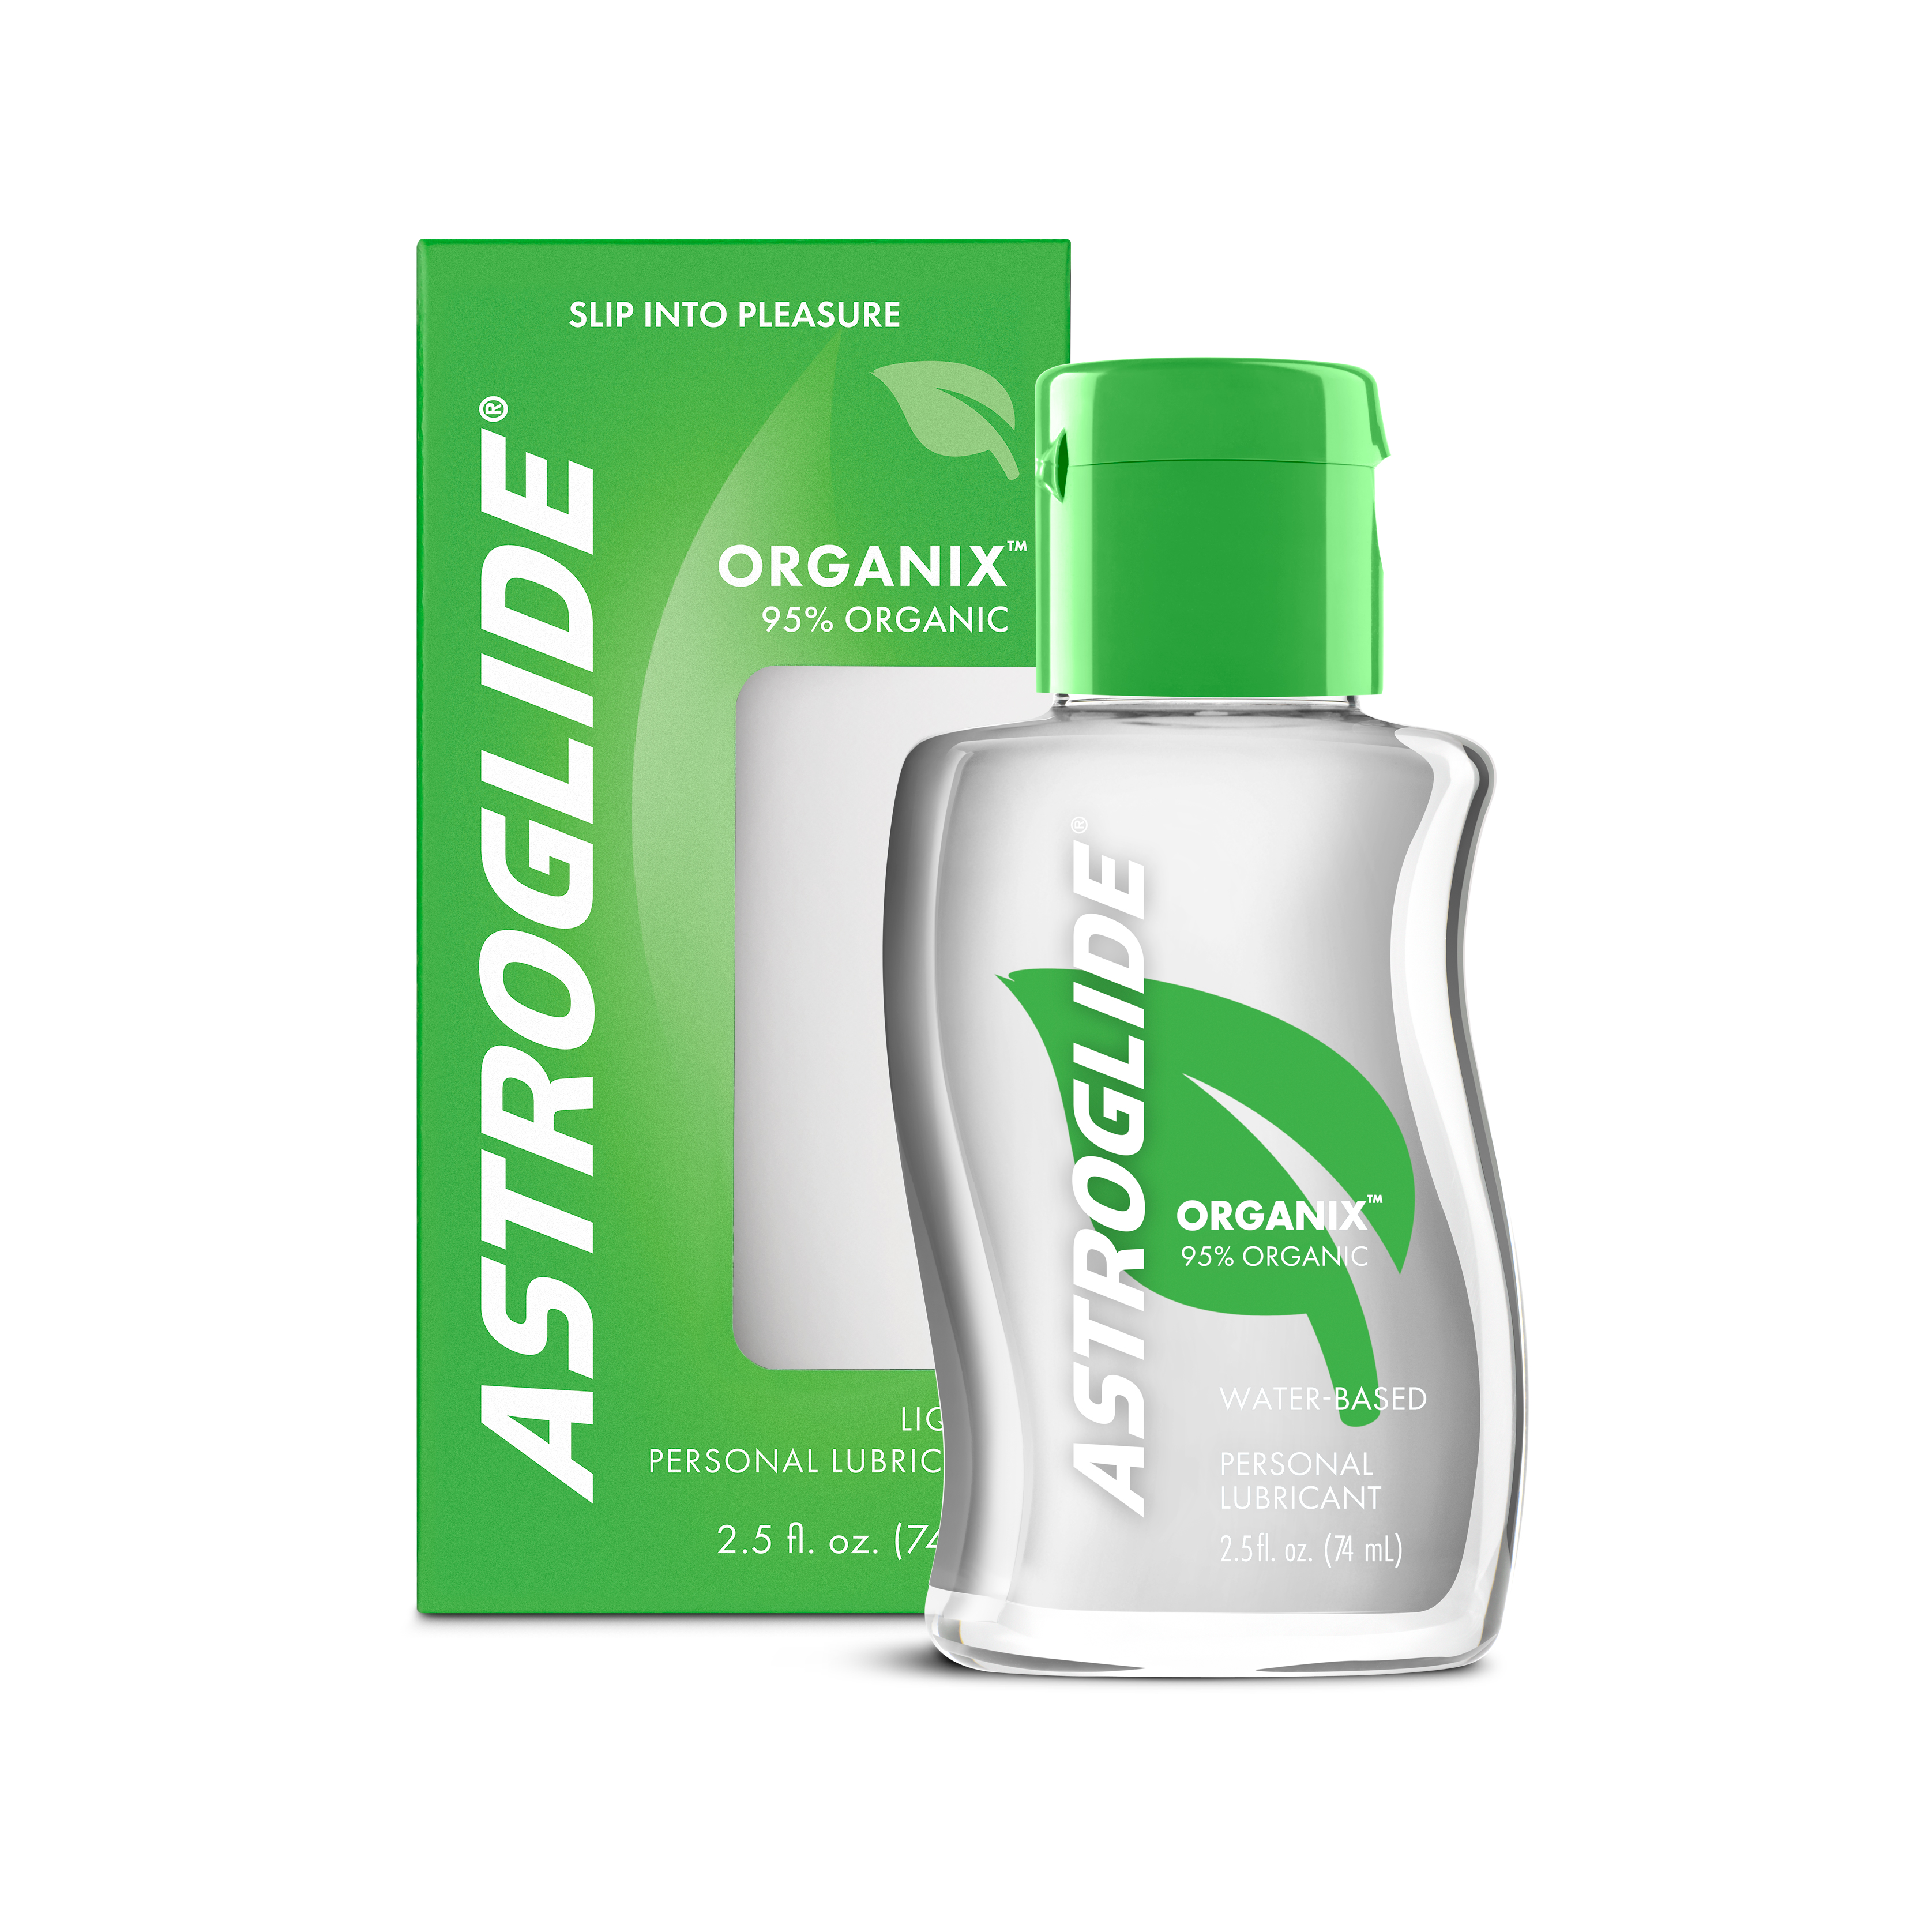 Astroglide «Organix Liquid» 74ml natural lubricant with organic ingredients - water-based and suitable for vegans